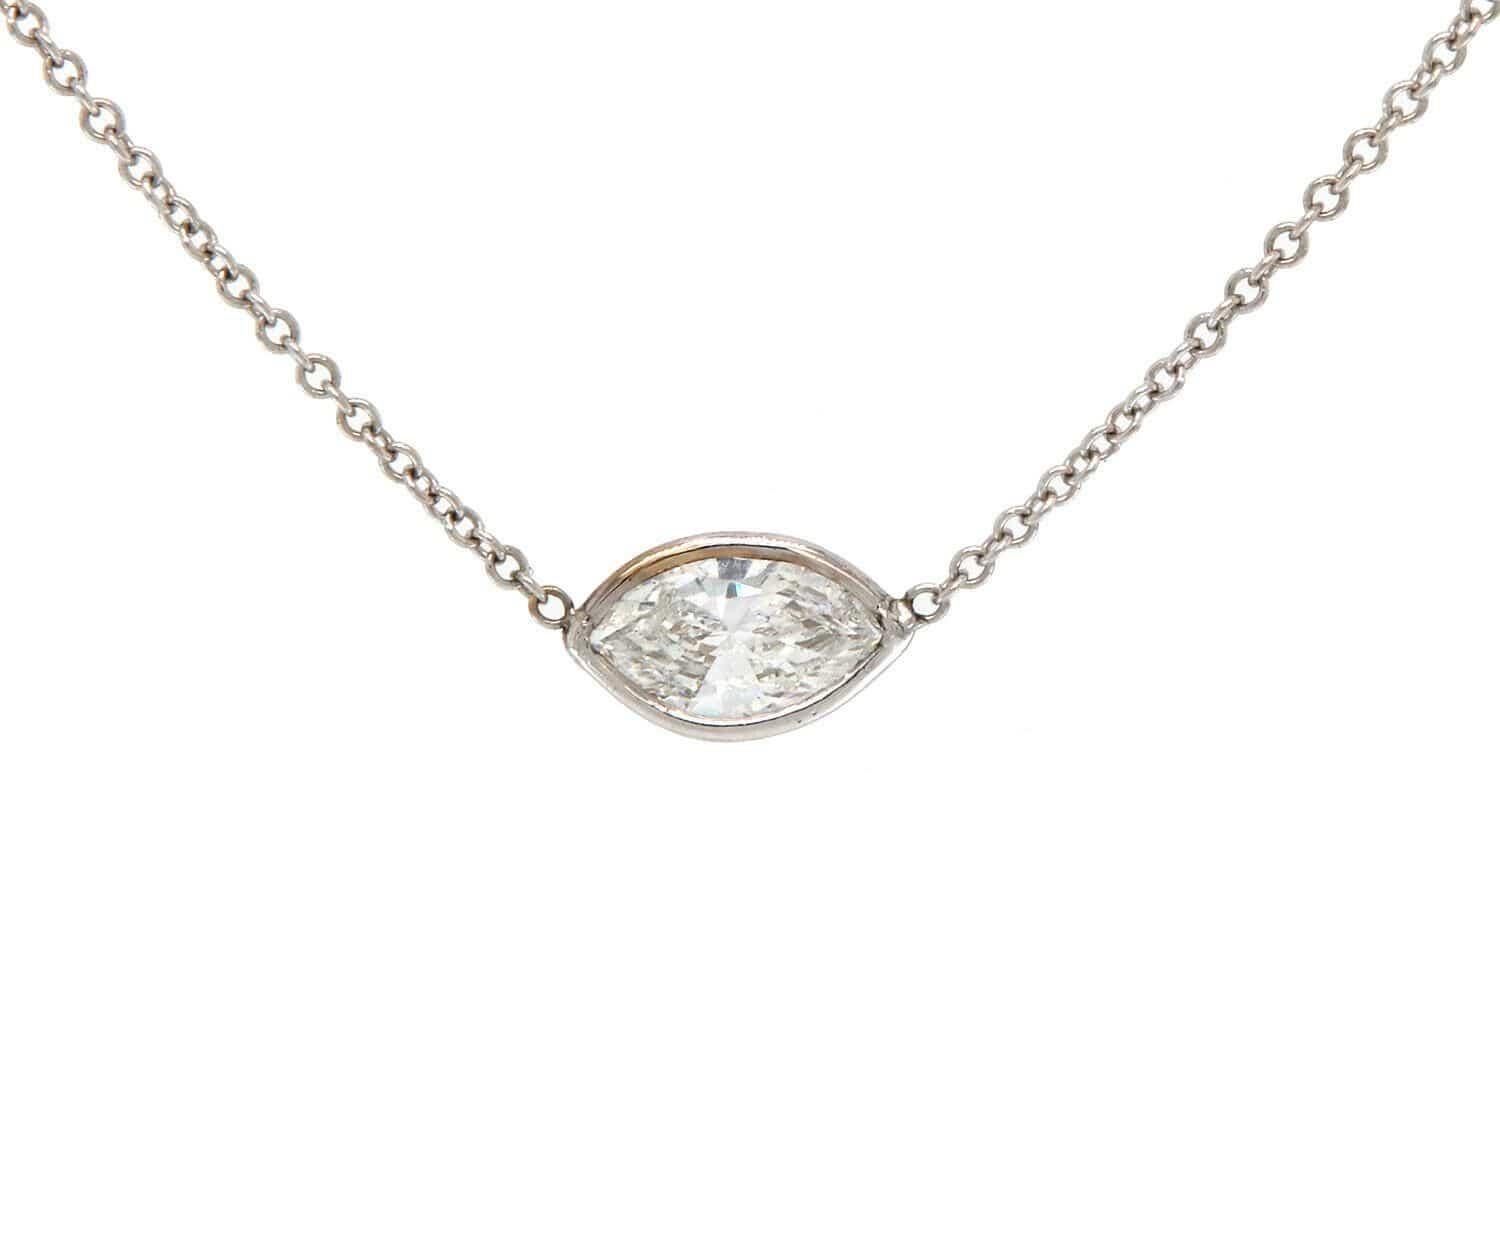 0.48ct Sideways Marquise Diamond Bezel Set Solitaire Pendant Necklace In 14K

Sideways Marquise Diamond Bezel Set Solitaire Pendant Necklace
14K White Gold
Marquette Diamond Carat Weight: 0.48ct
Clarity: SI2
Color: H
Necklace Width: Approx.1.0